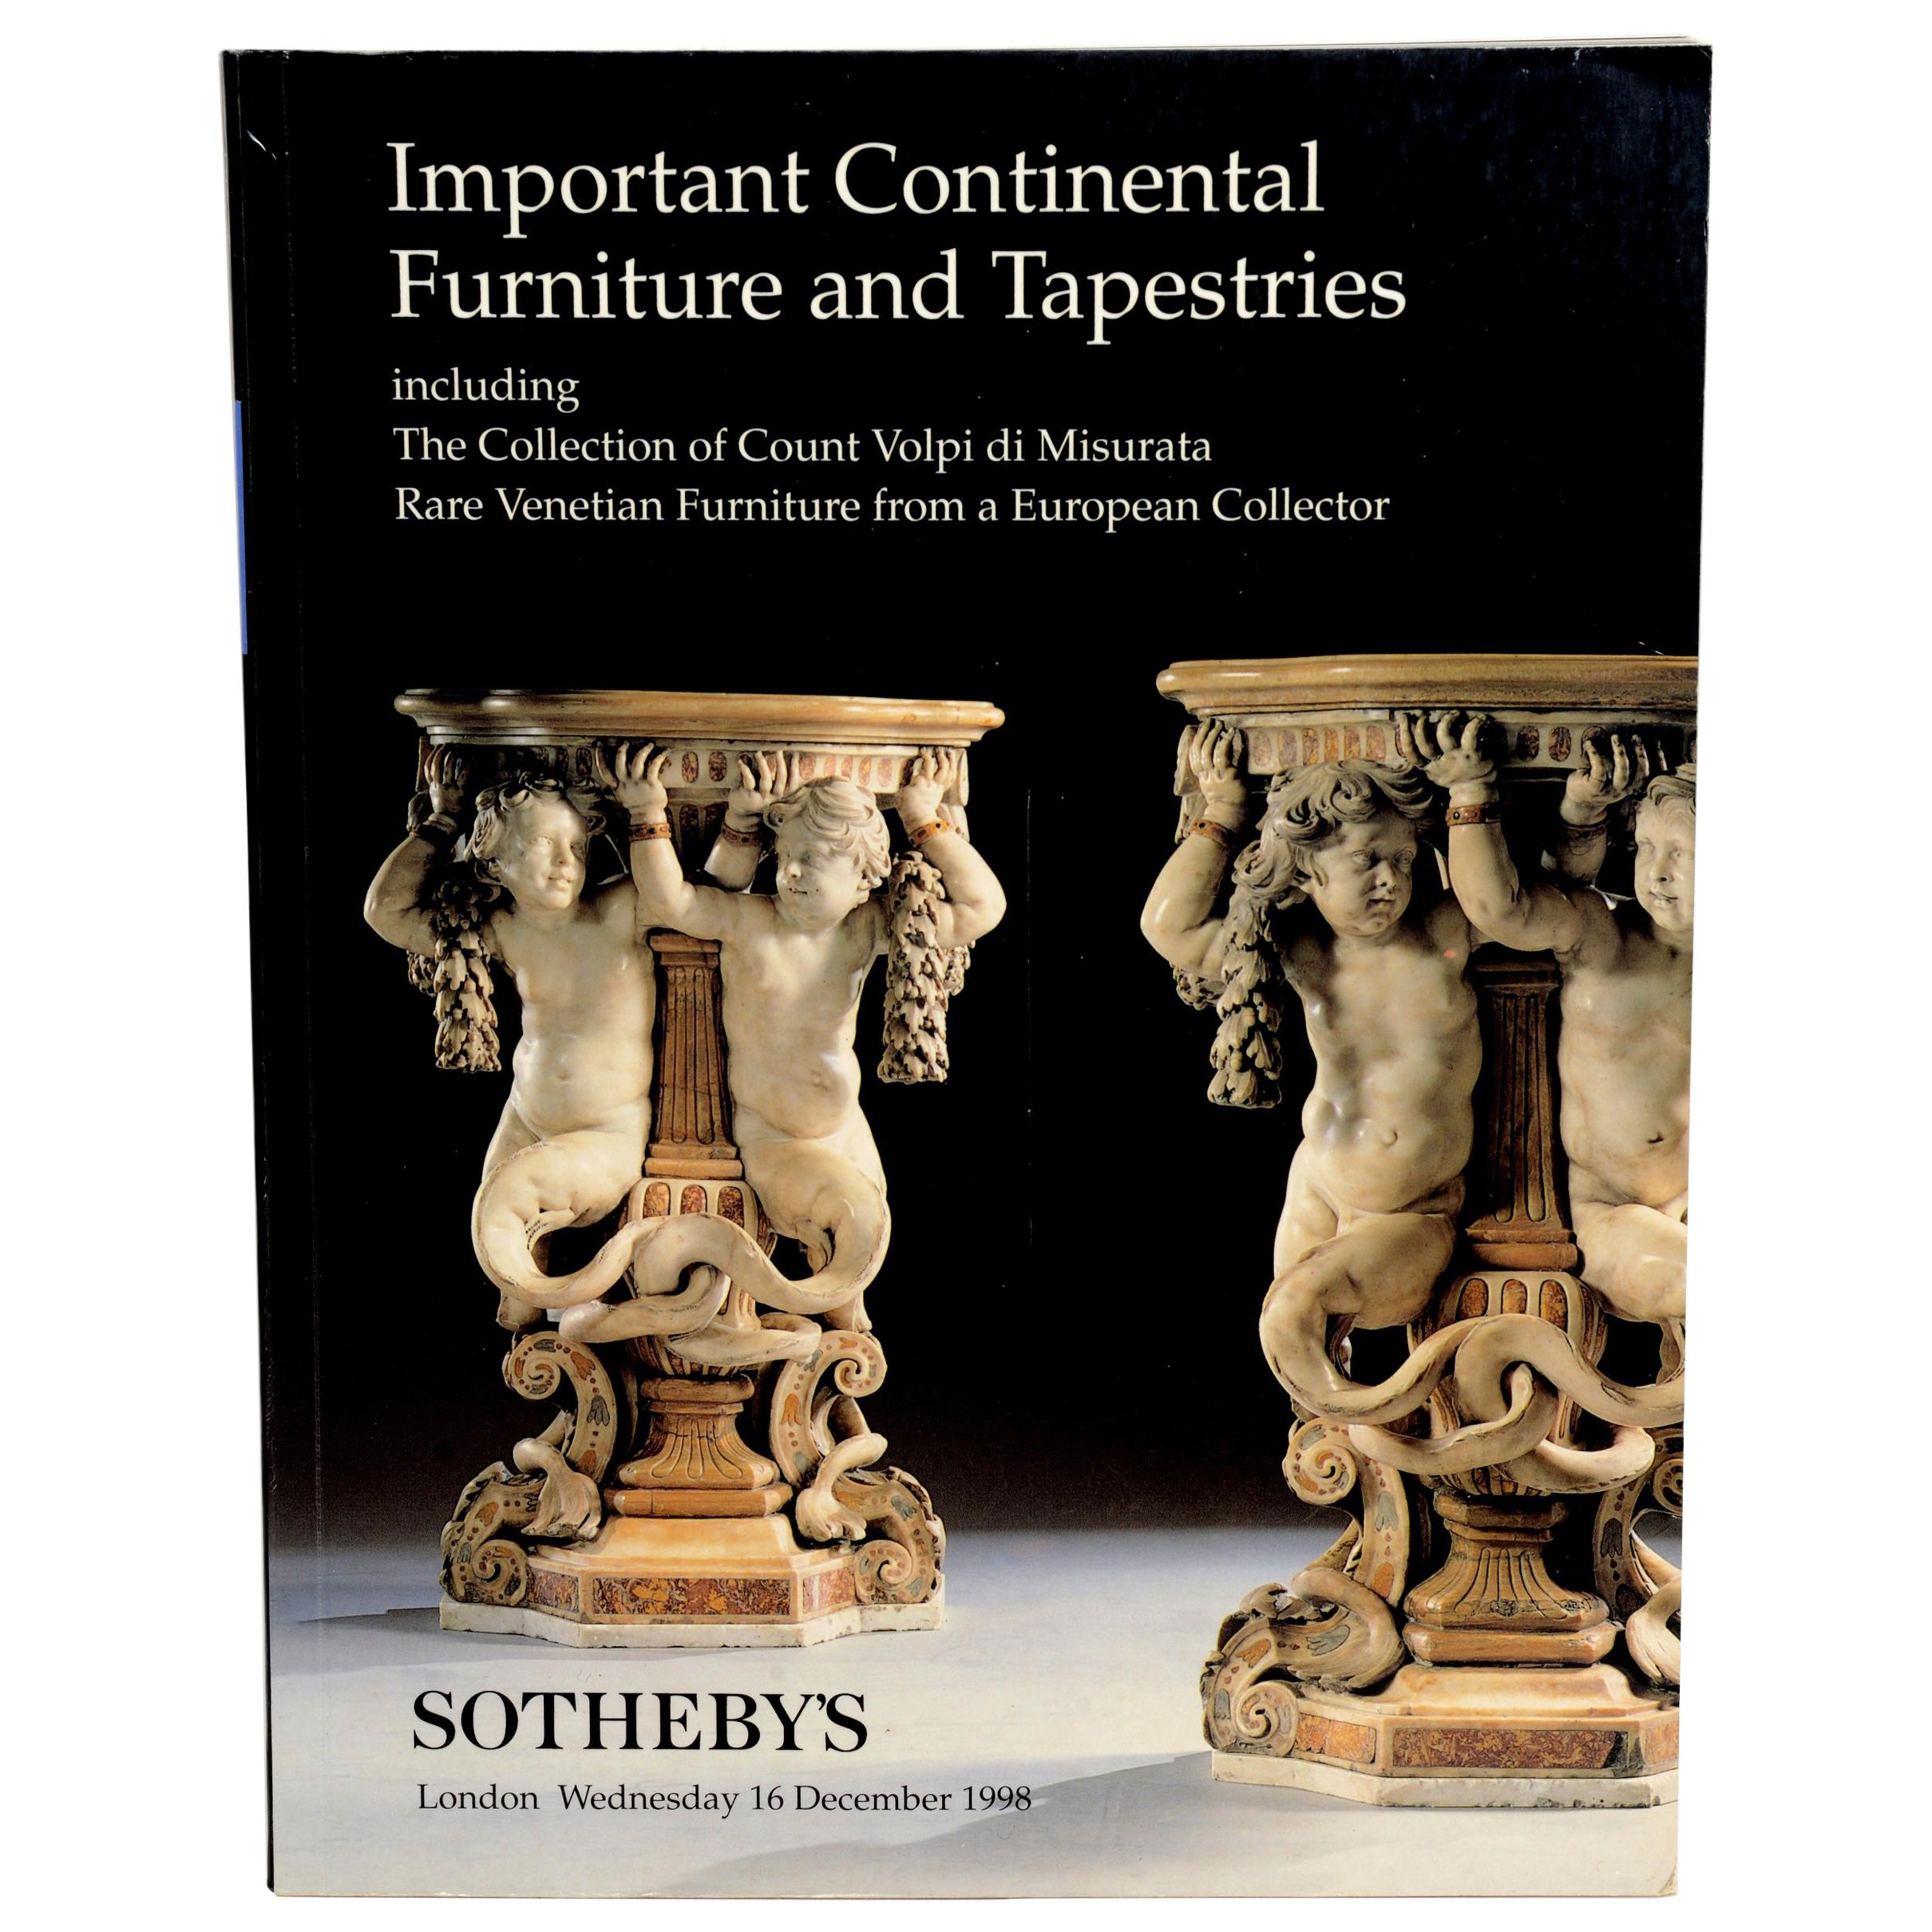 Important Venetian, Continental Furniture and Tapestries, Sotheby's, 1998